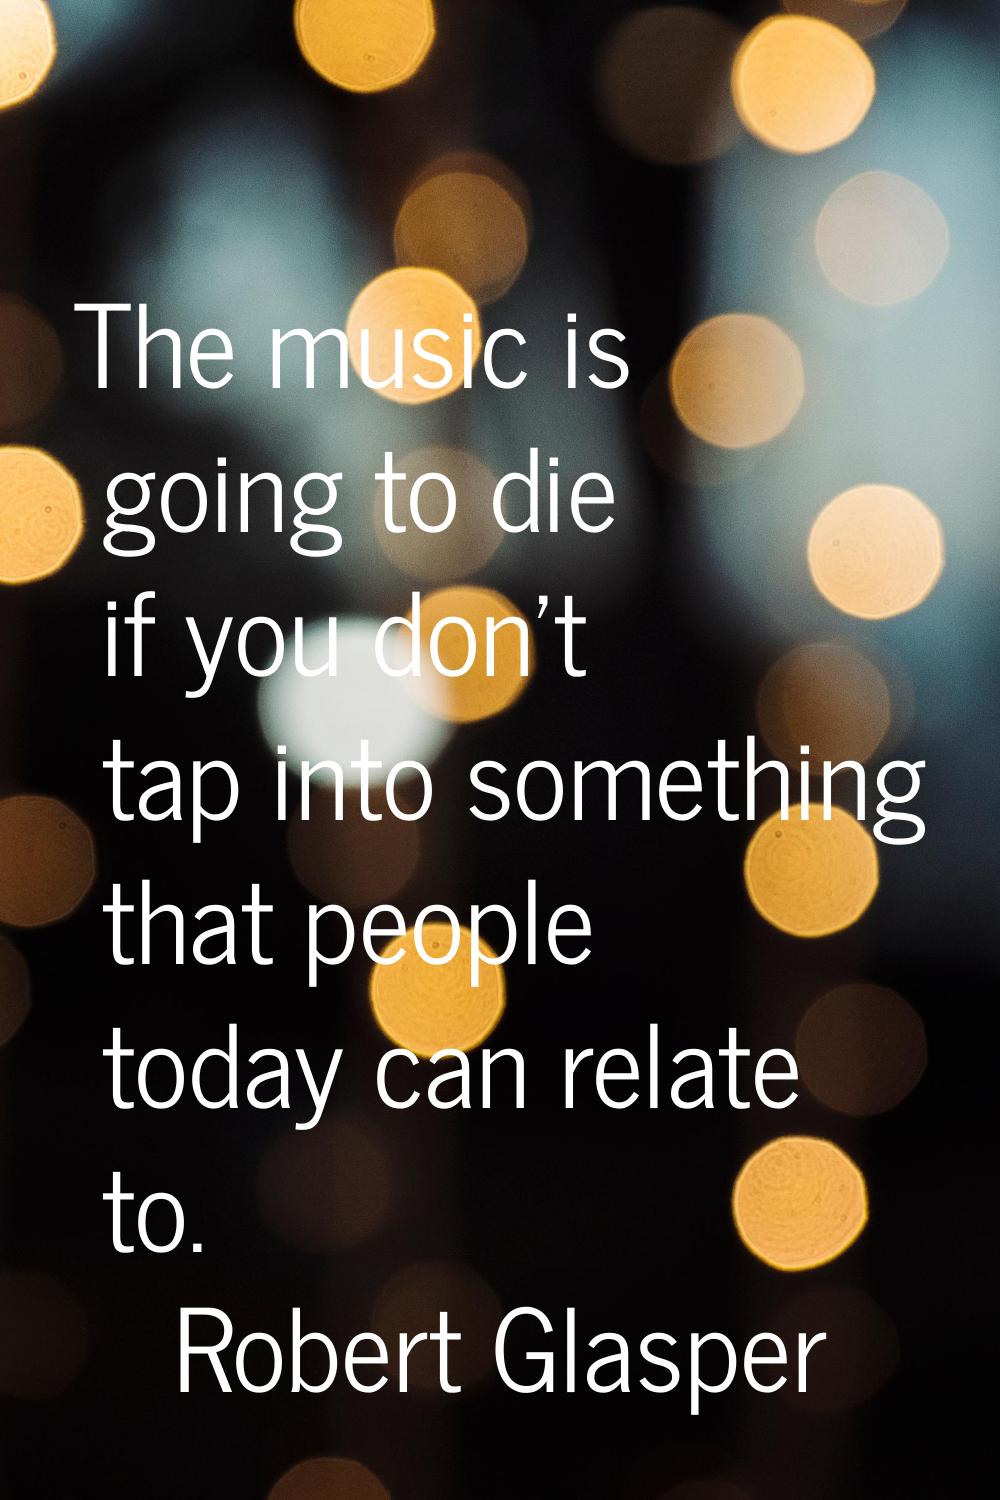 The music is going to die if you don't tap into something that people today can relate to.